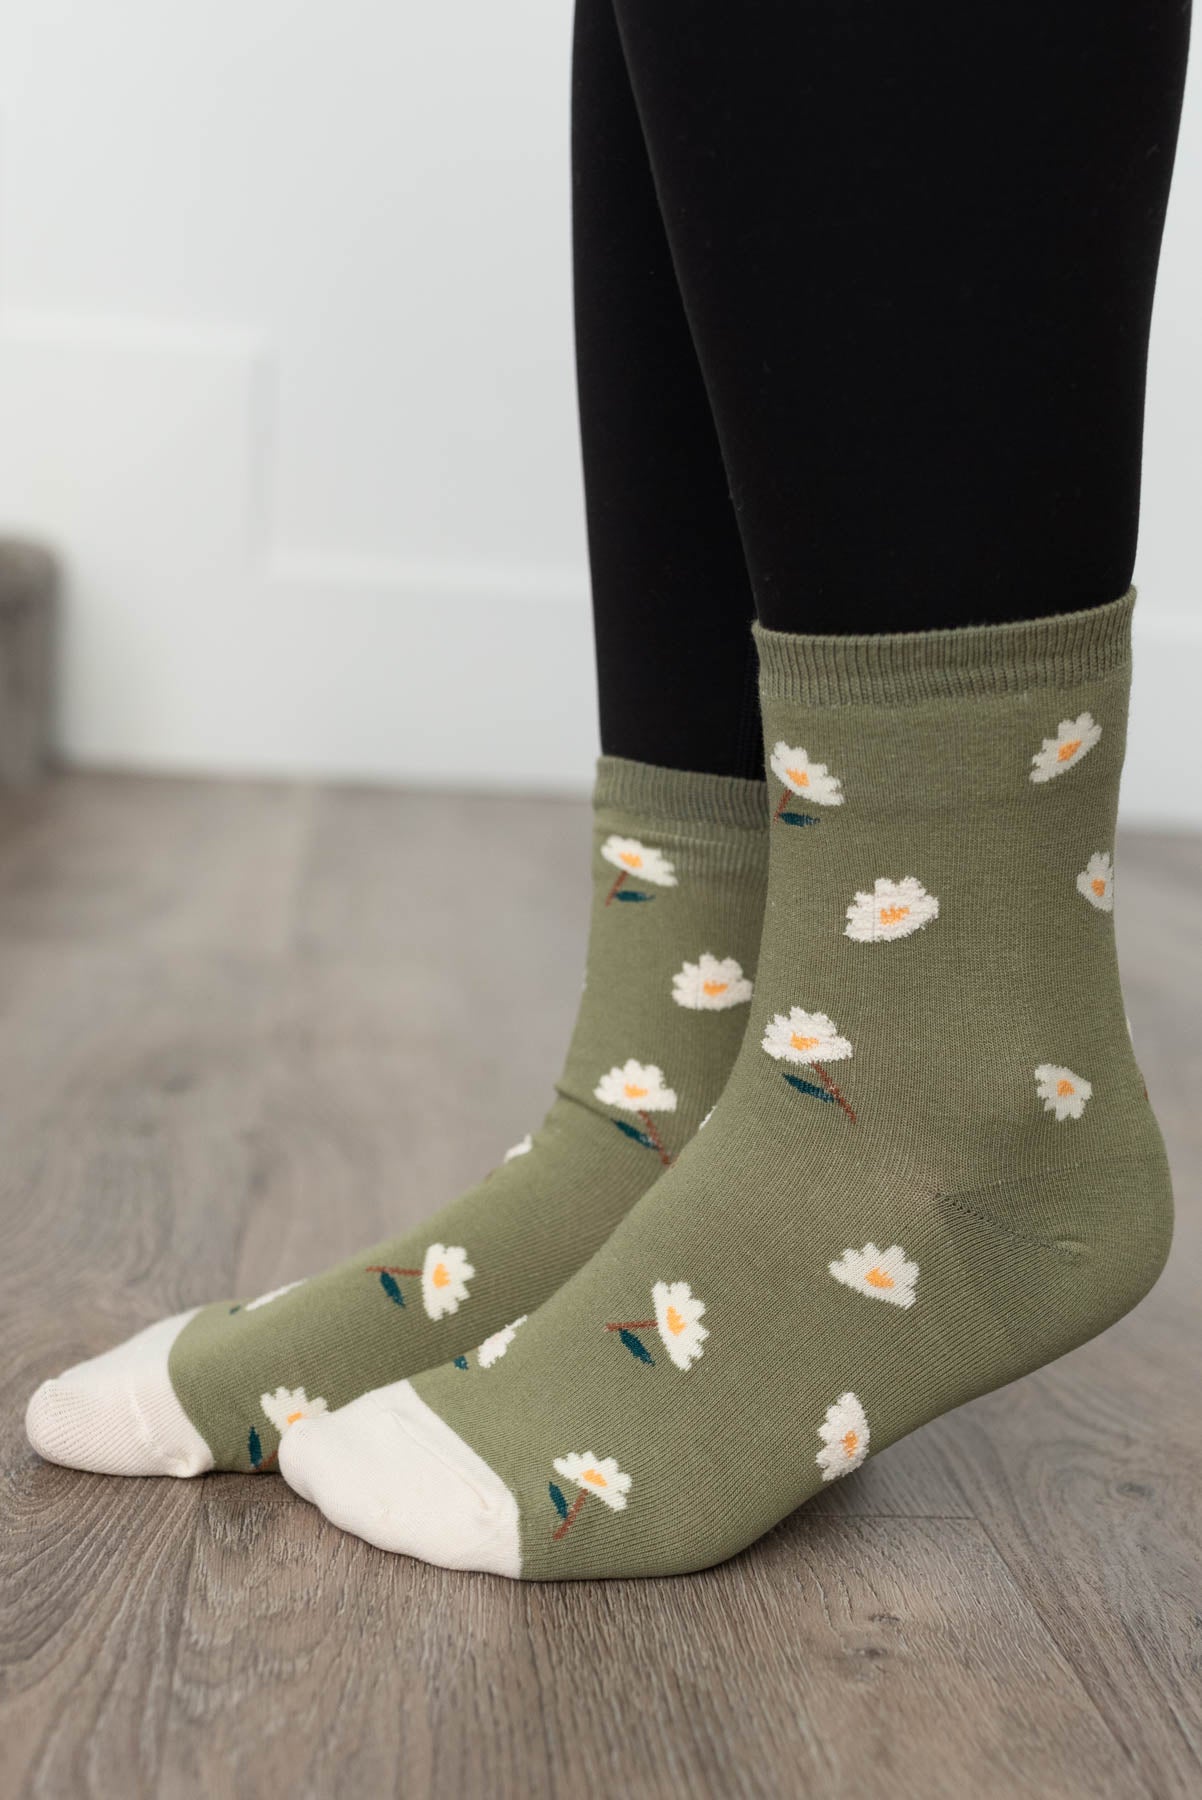 Side view of the olive daisy garden socks